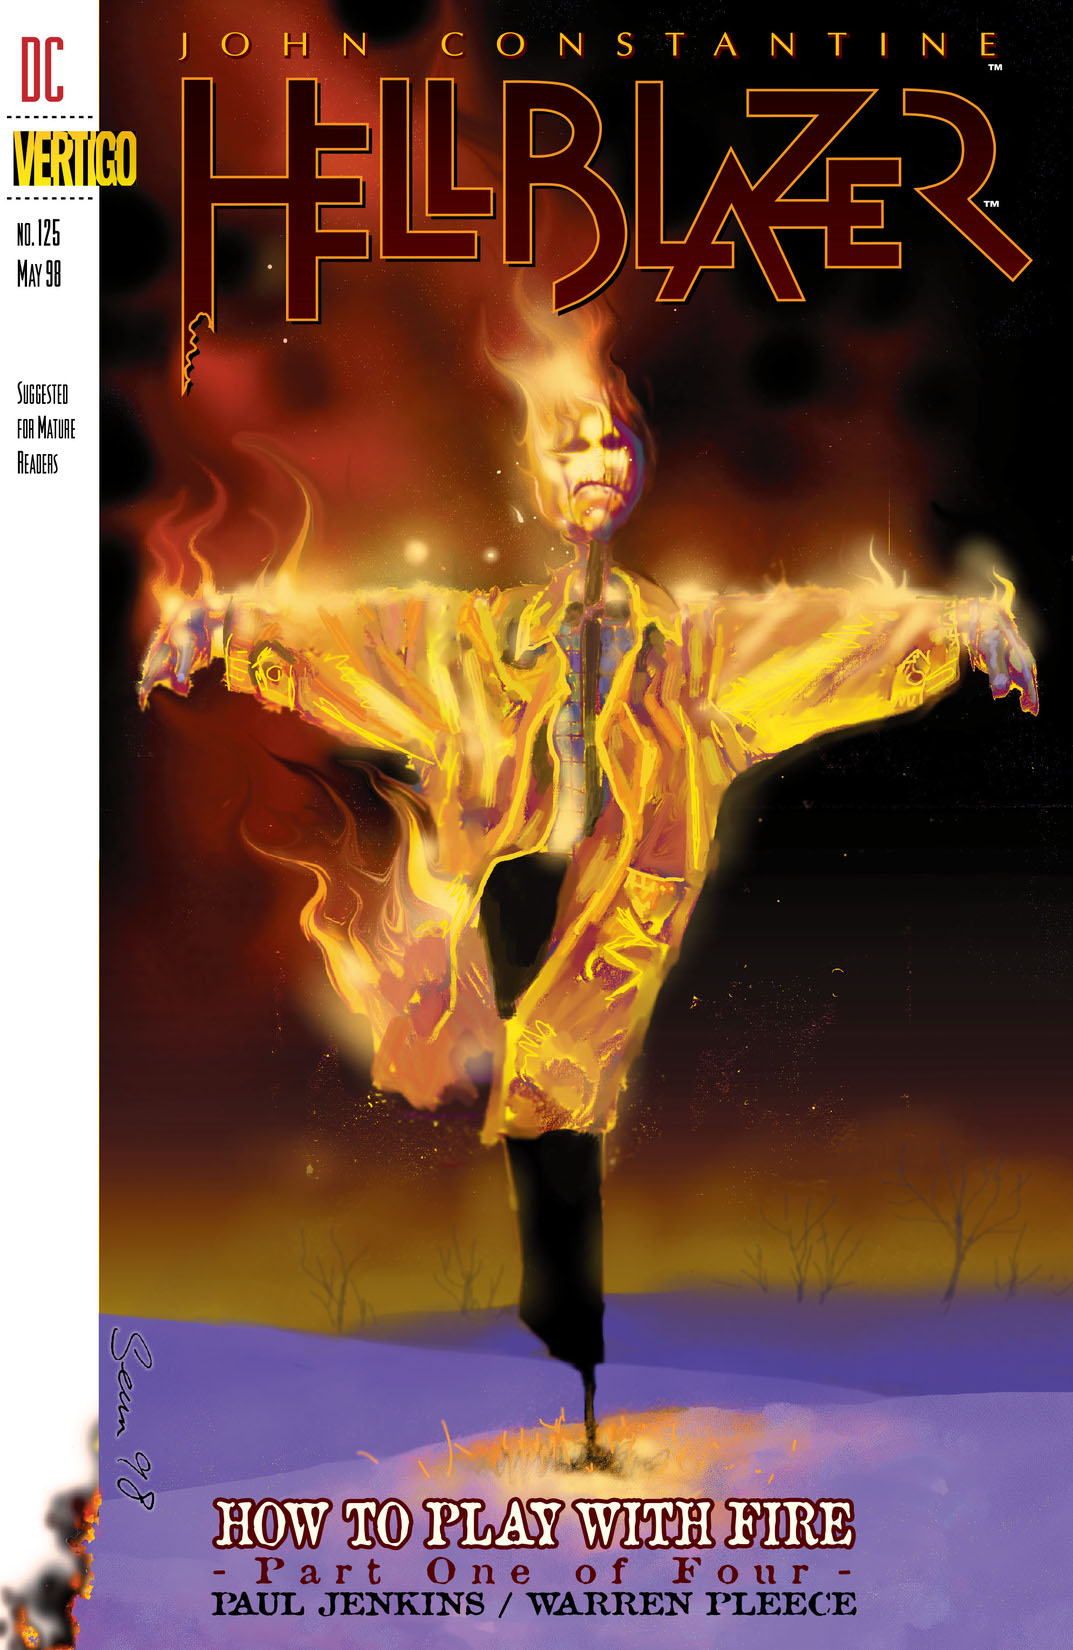 Hellblazer #125 preview images